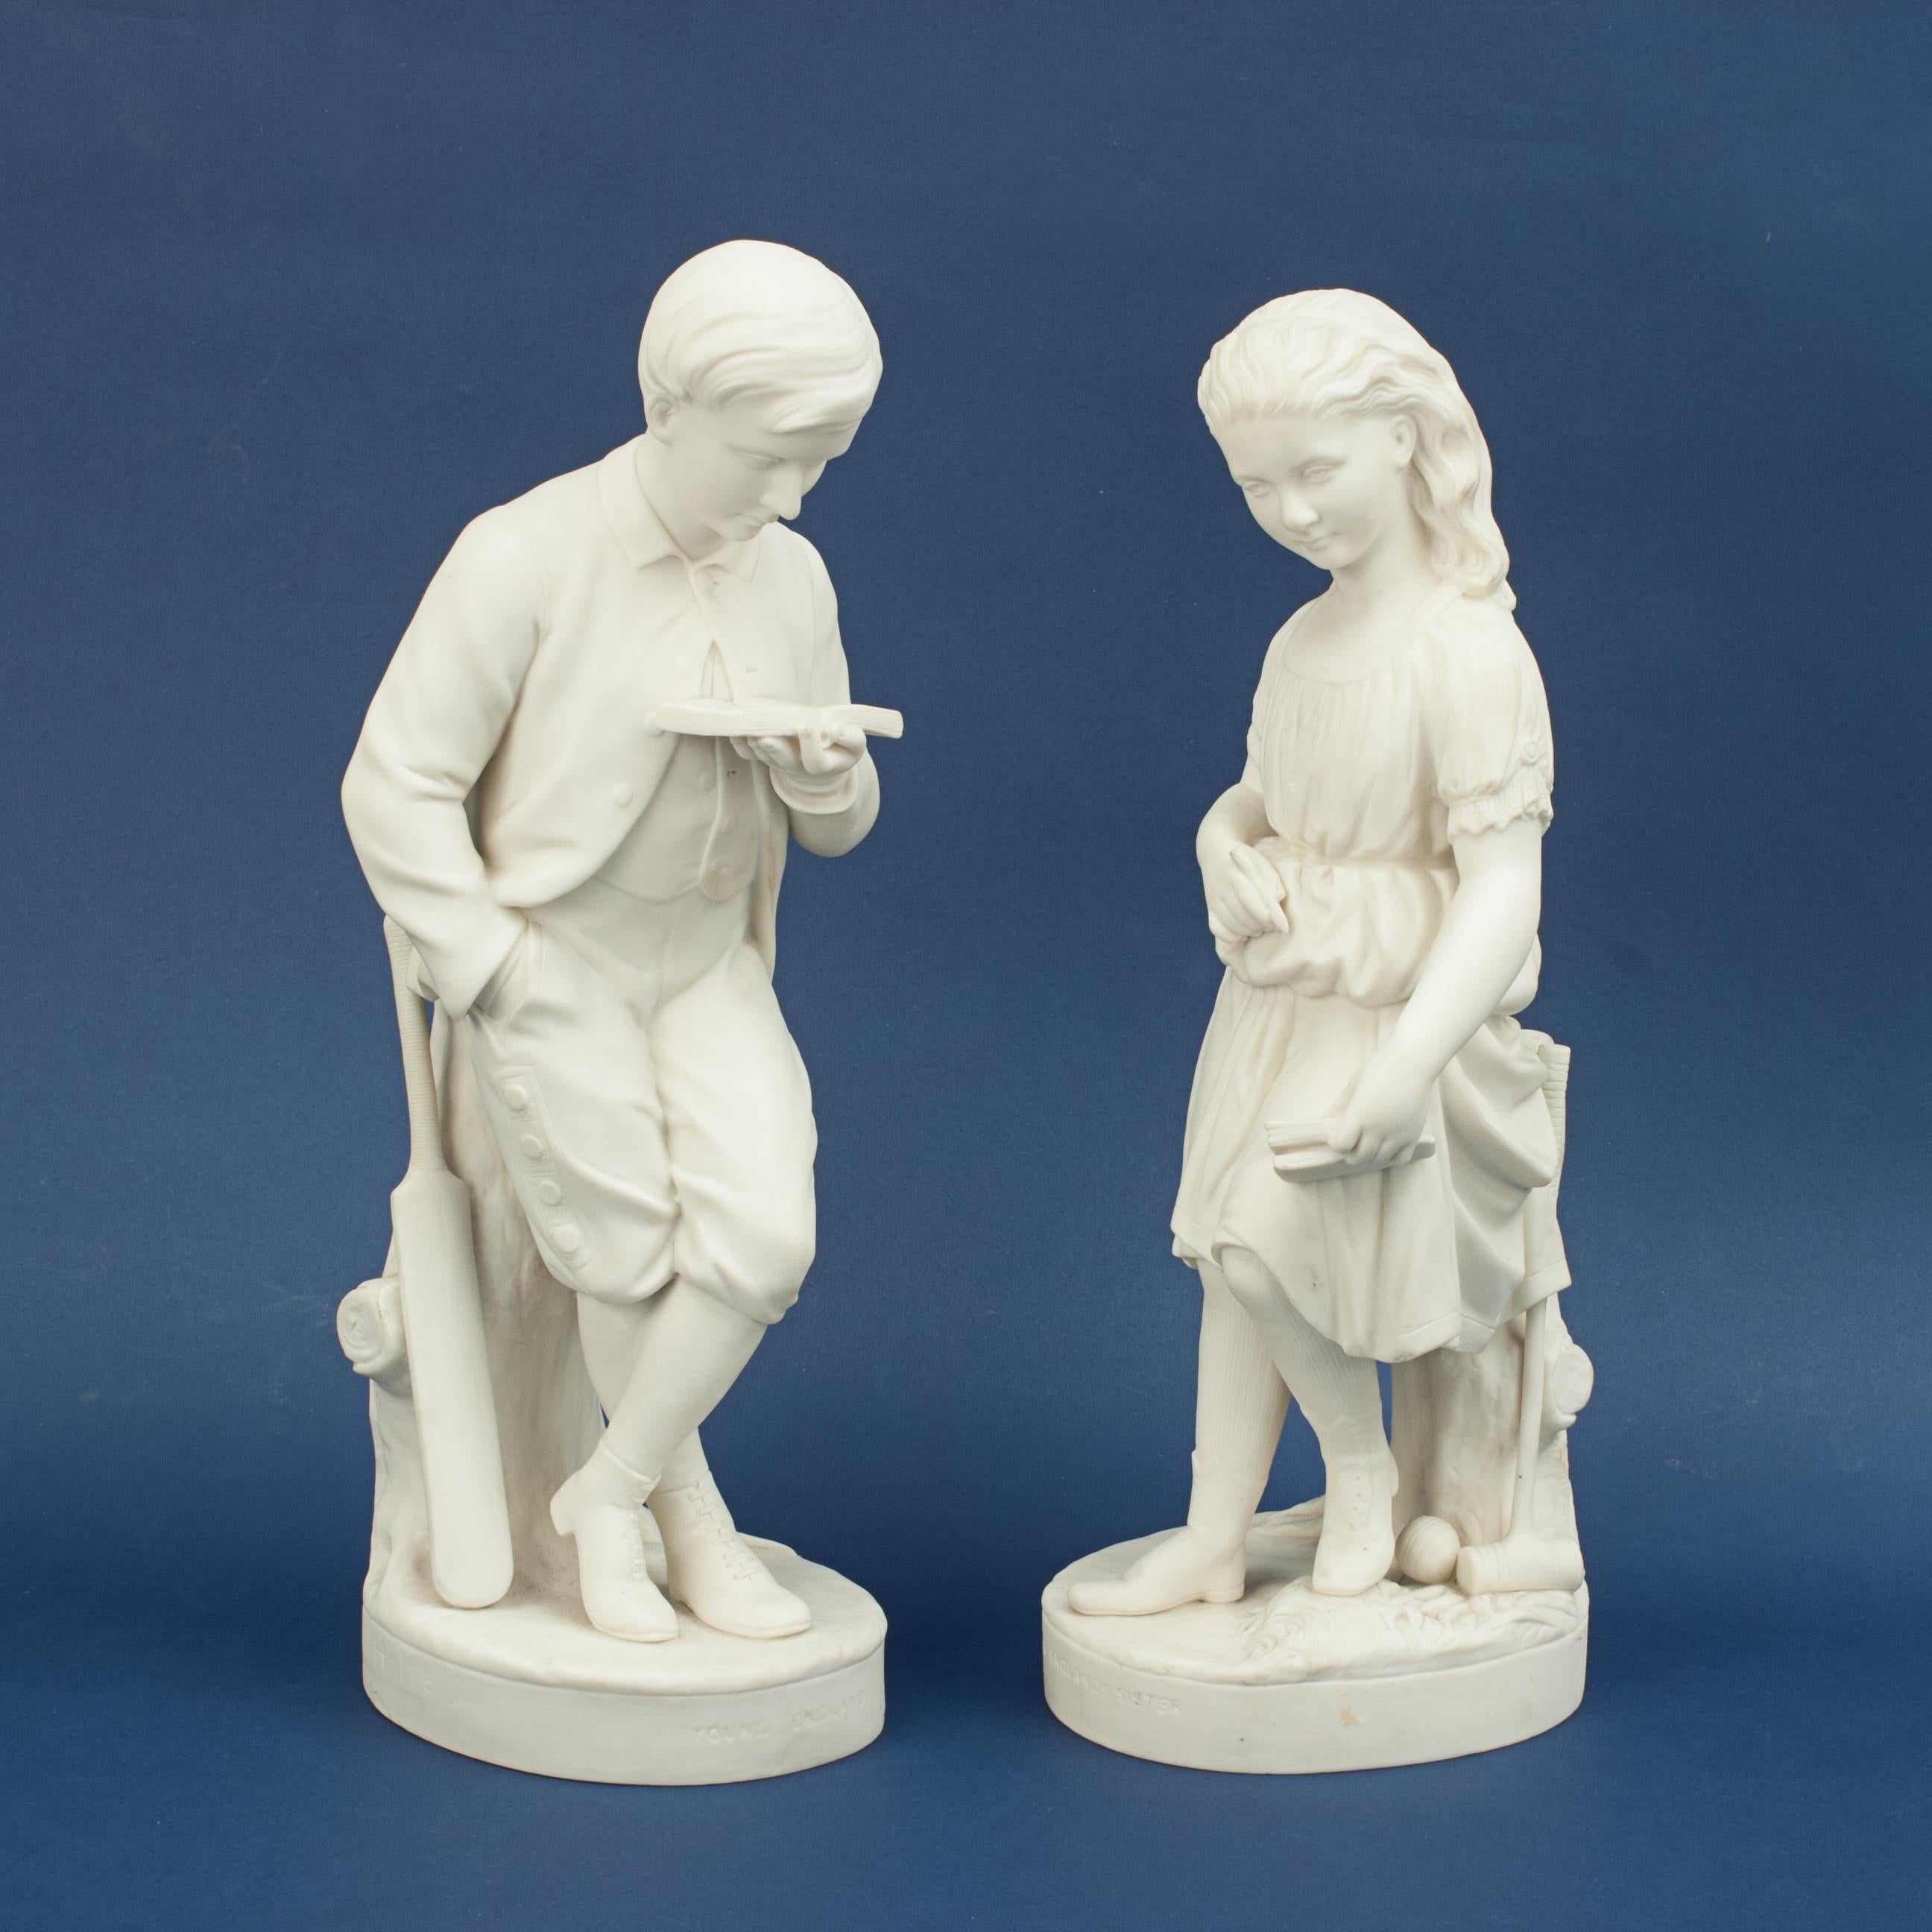 Vintage Copeland Parian Figures, Young England & His Sister.
A very good pair of Copeland figures, Parian Ware, entitled 'Young England' and 'Young England's Sister'. Both figures cast by the sculptor George Halse. Young England is seen reading a